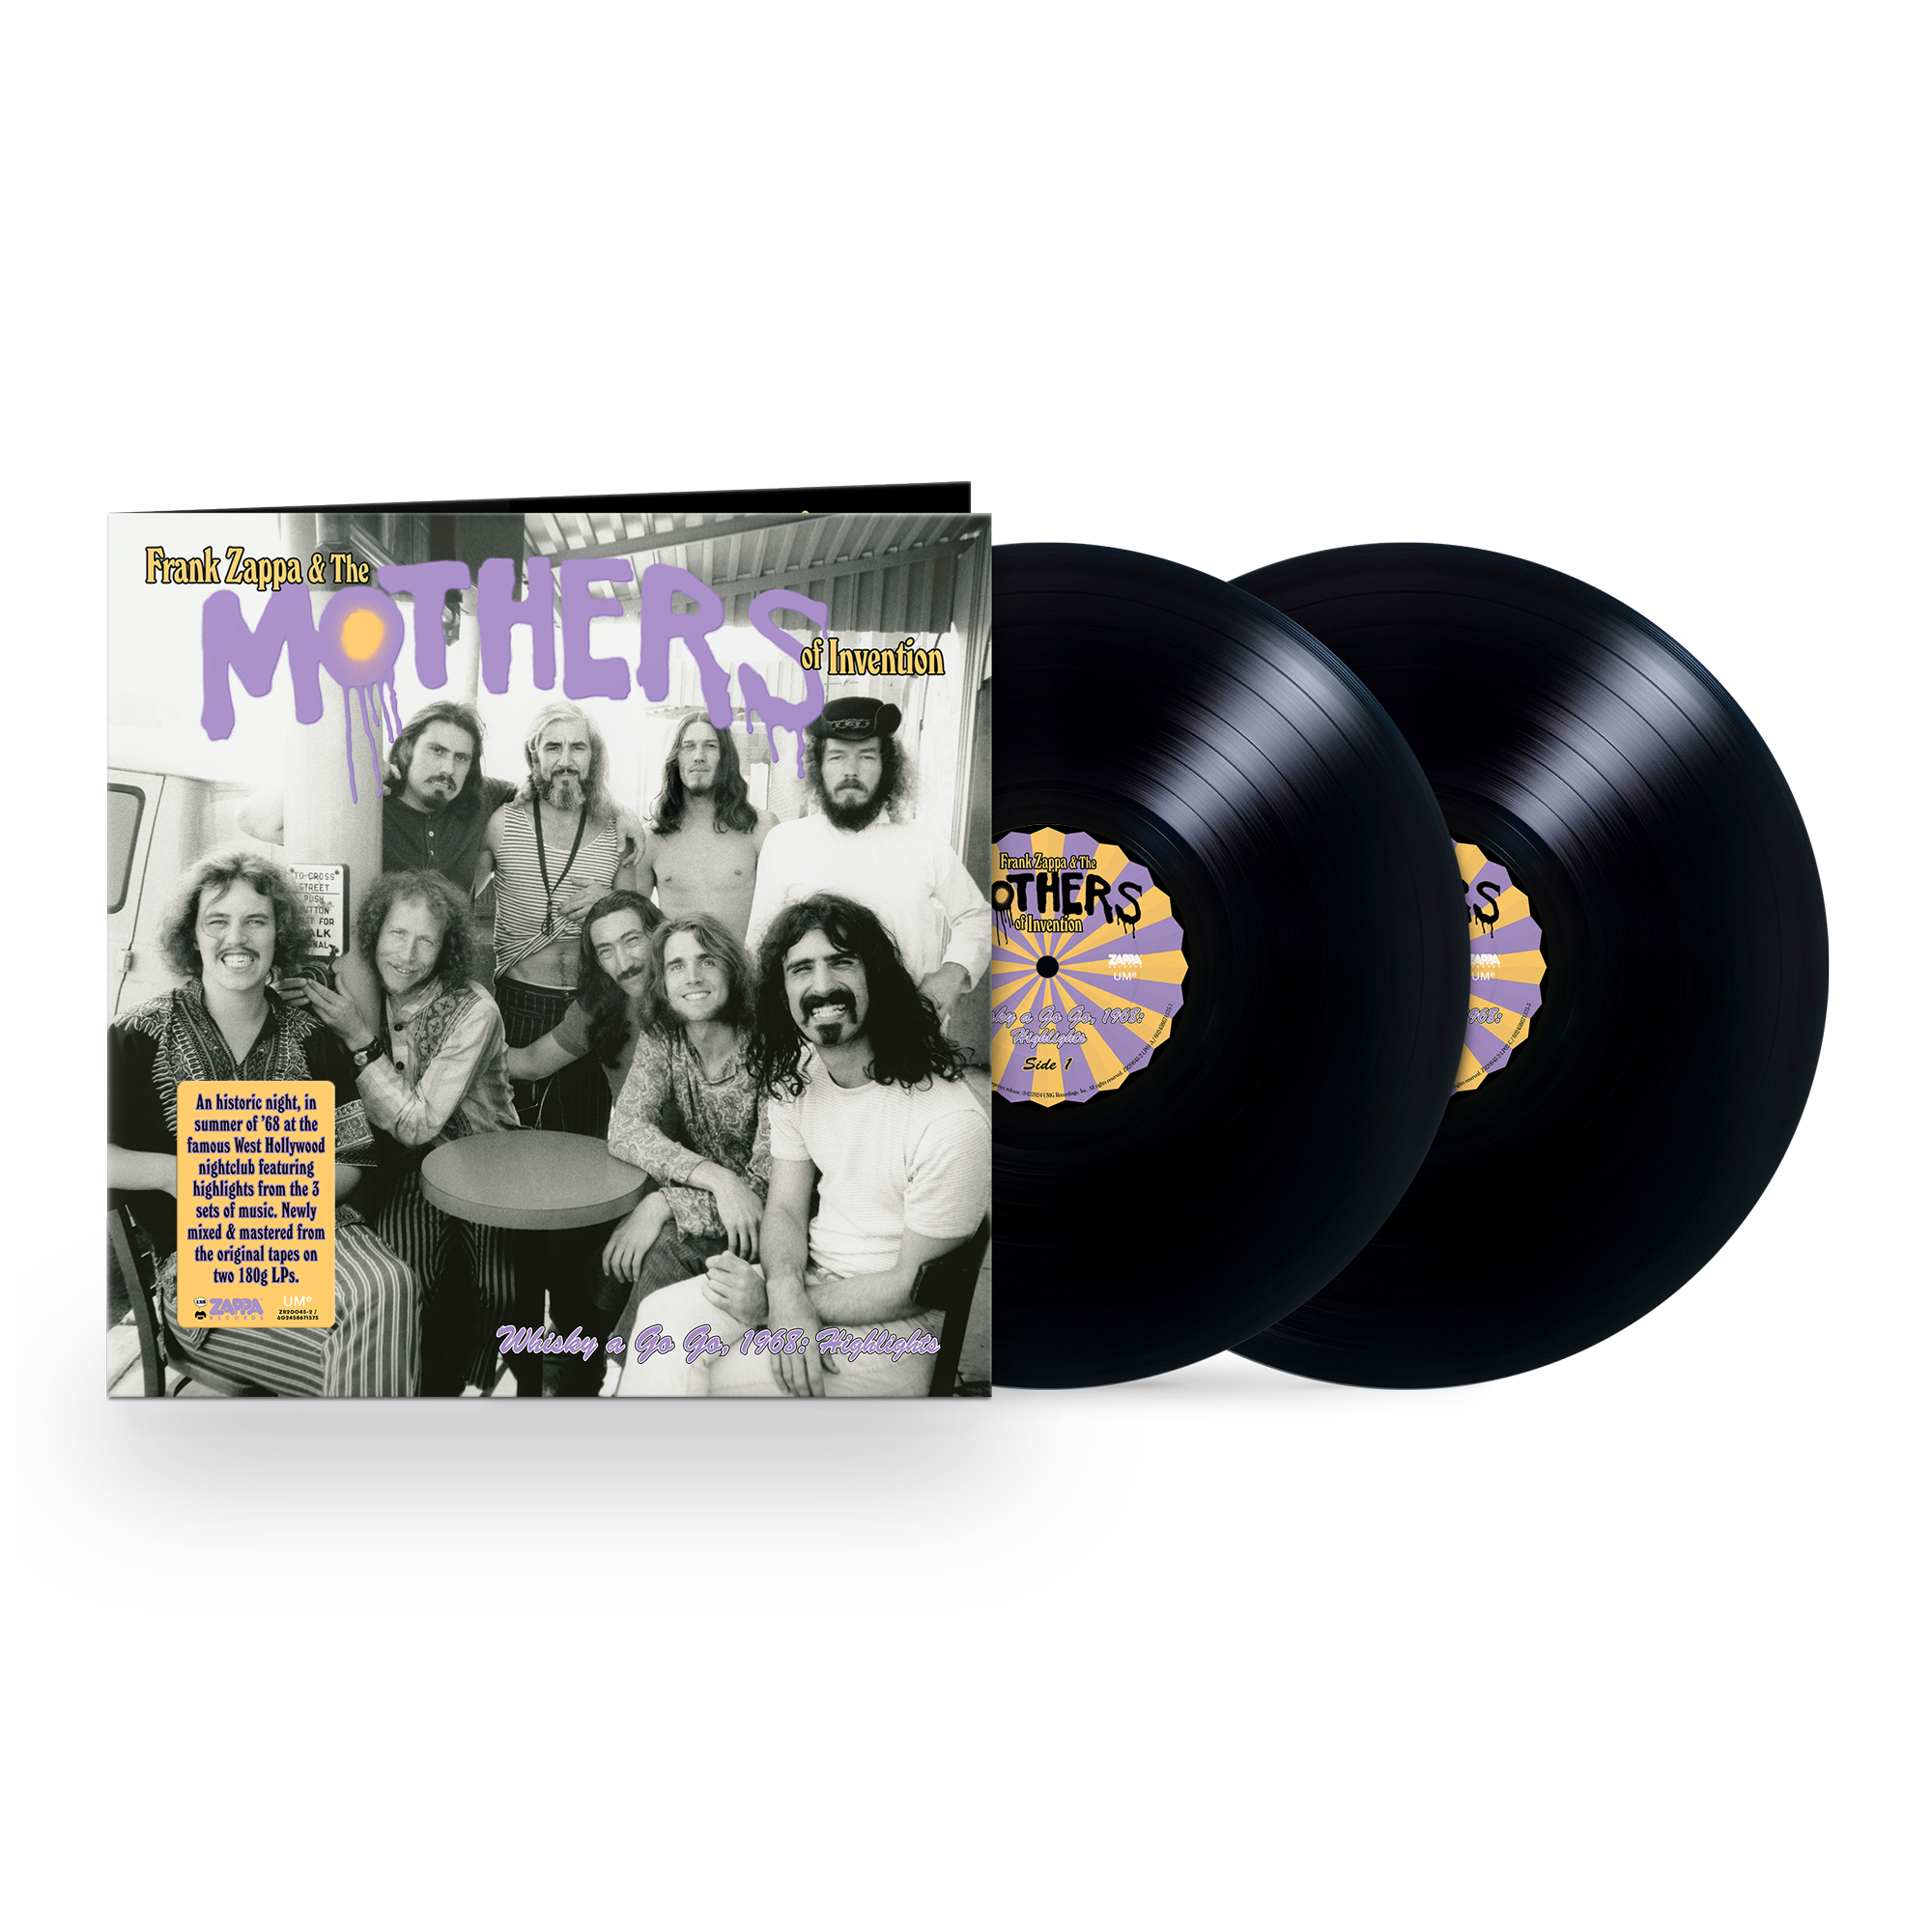 Frank Zappa & The Mothers Of Invention - Live At The Whisky A Go Go, 1968: Vinyl 2LP